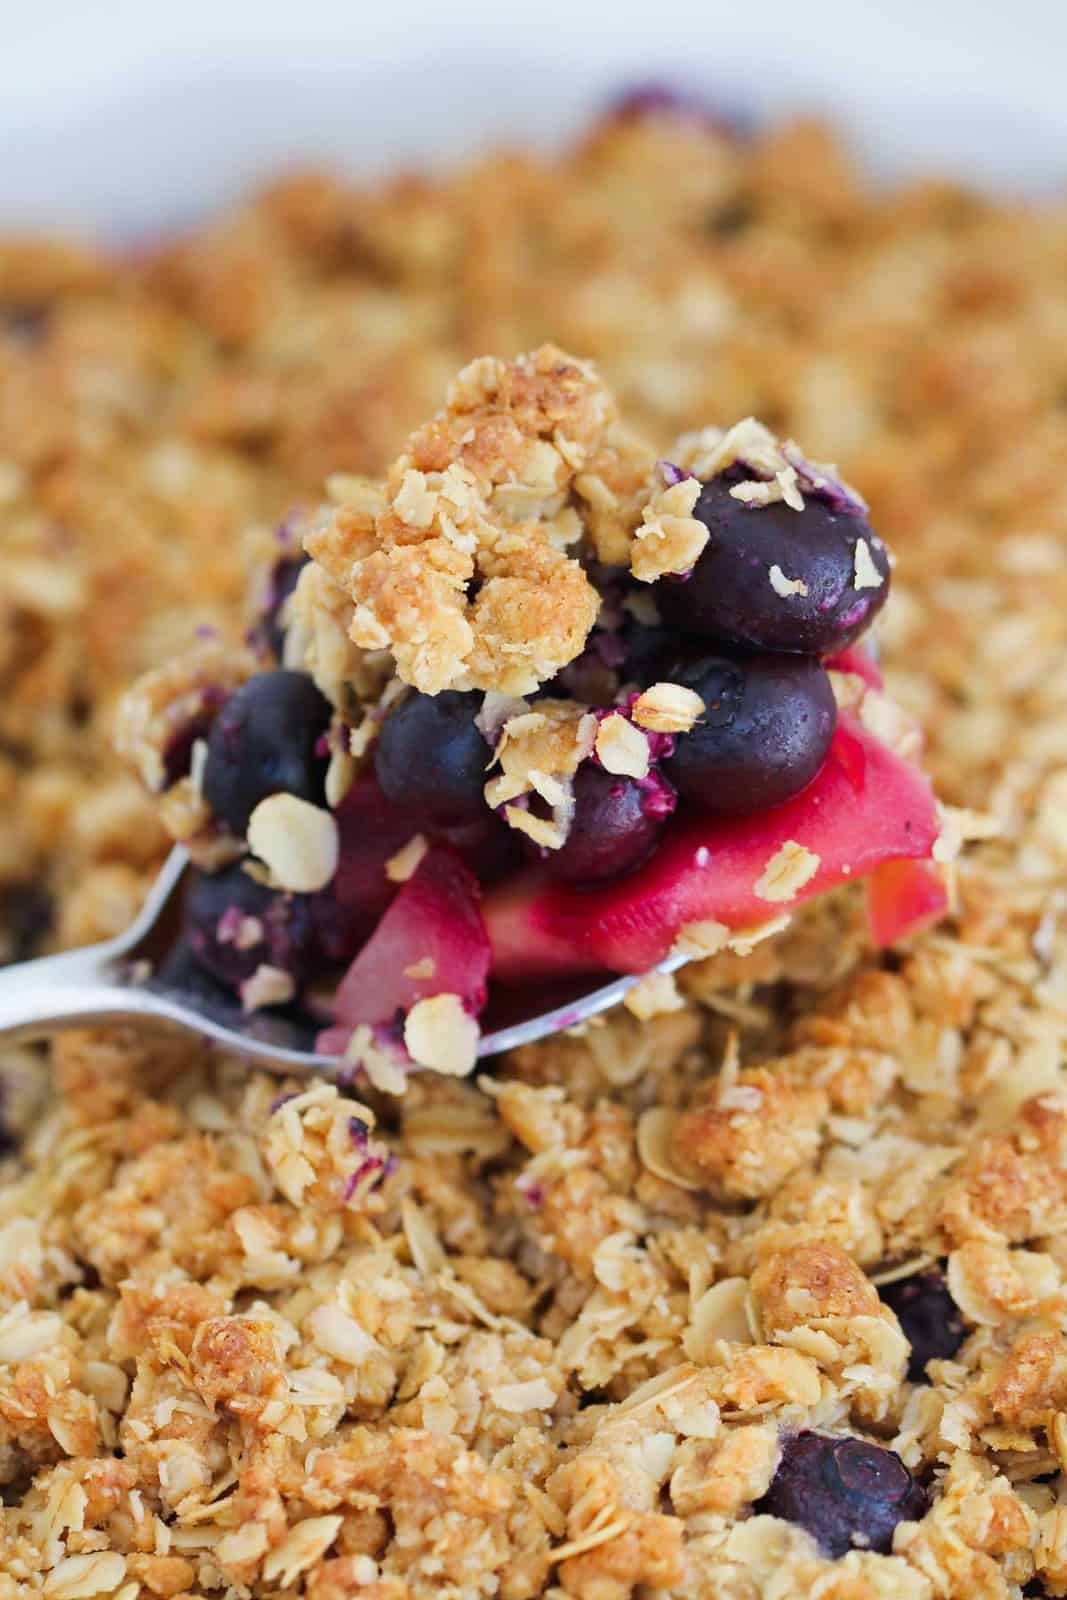 A spoon full of apple and blueberries being lifted from a baked crumble.